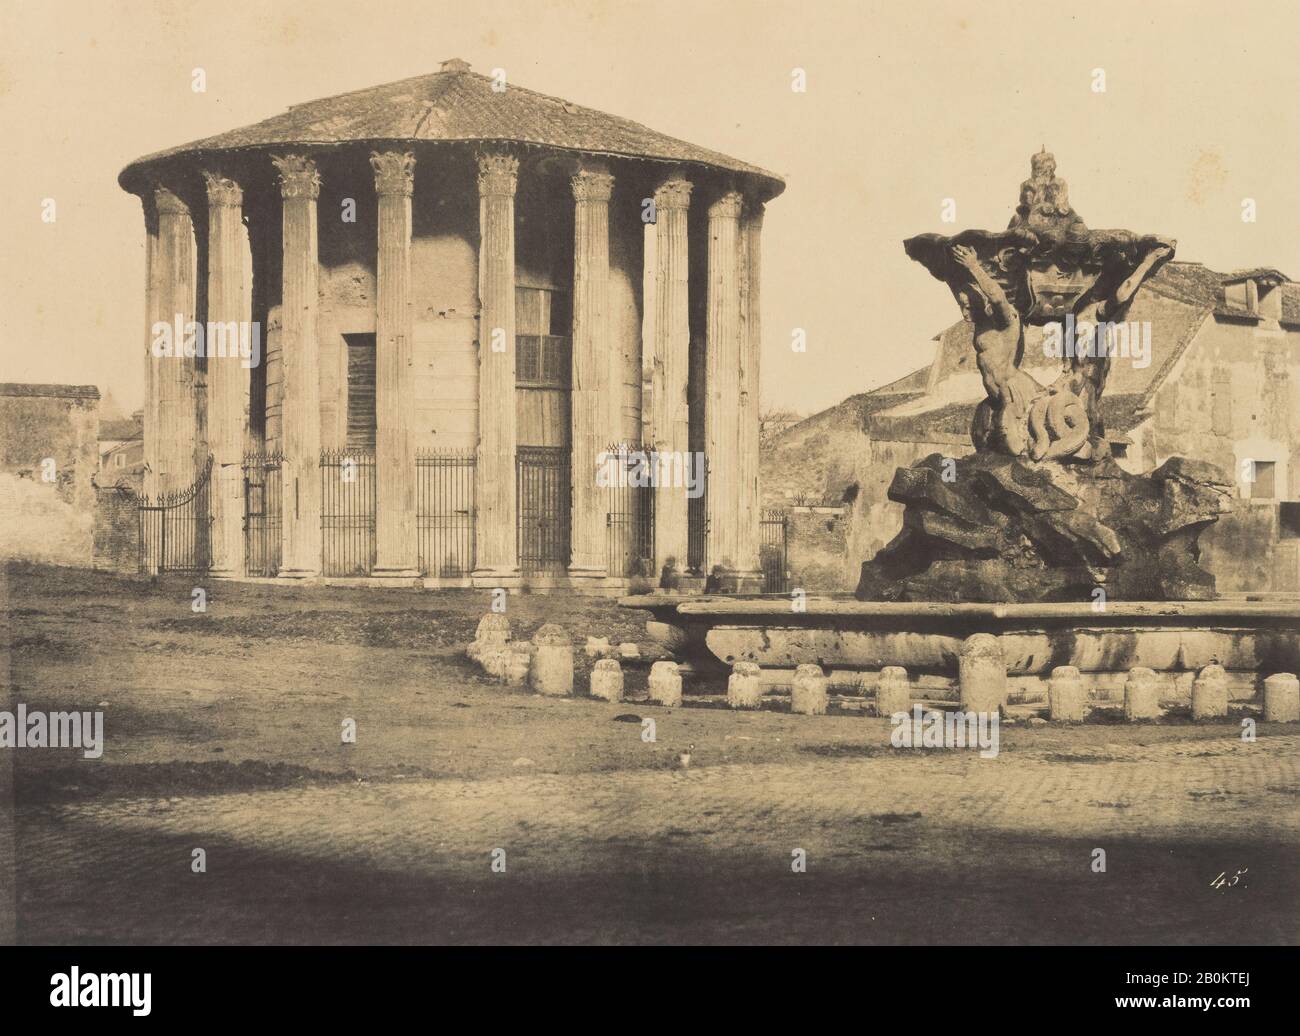 Attributed to Firmin-Eugène Le Dien, Temple of Vesta and Fountain, Piazza Bocca della Verita, Attributed to Firmin-Eugène Le Dien (French, 1817–1865), in collaboration with Gustave Le Gray (French, 1820–1884), ca. 1855, Salted paper print from paper negative, 23.7 x 19 cm (9 5/16 x 7 1/2 in. ), Photographs Stock Photo